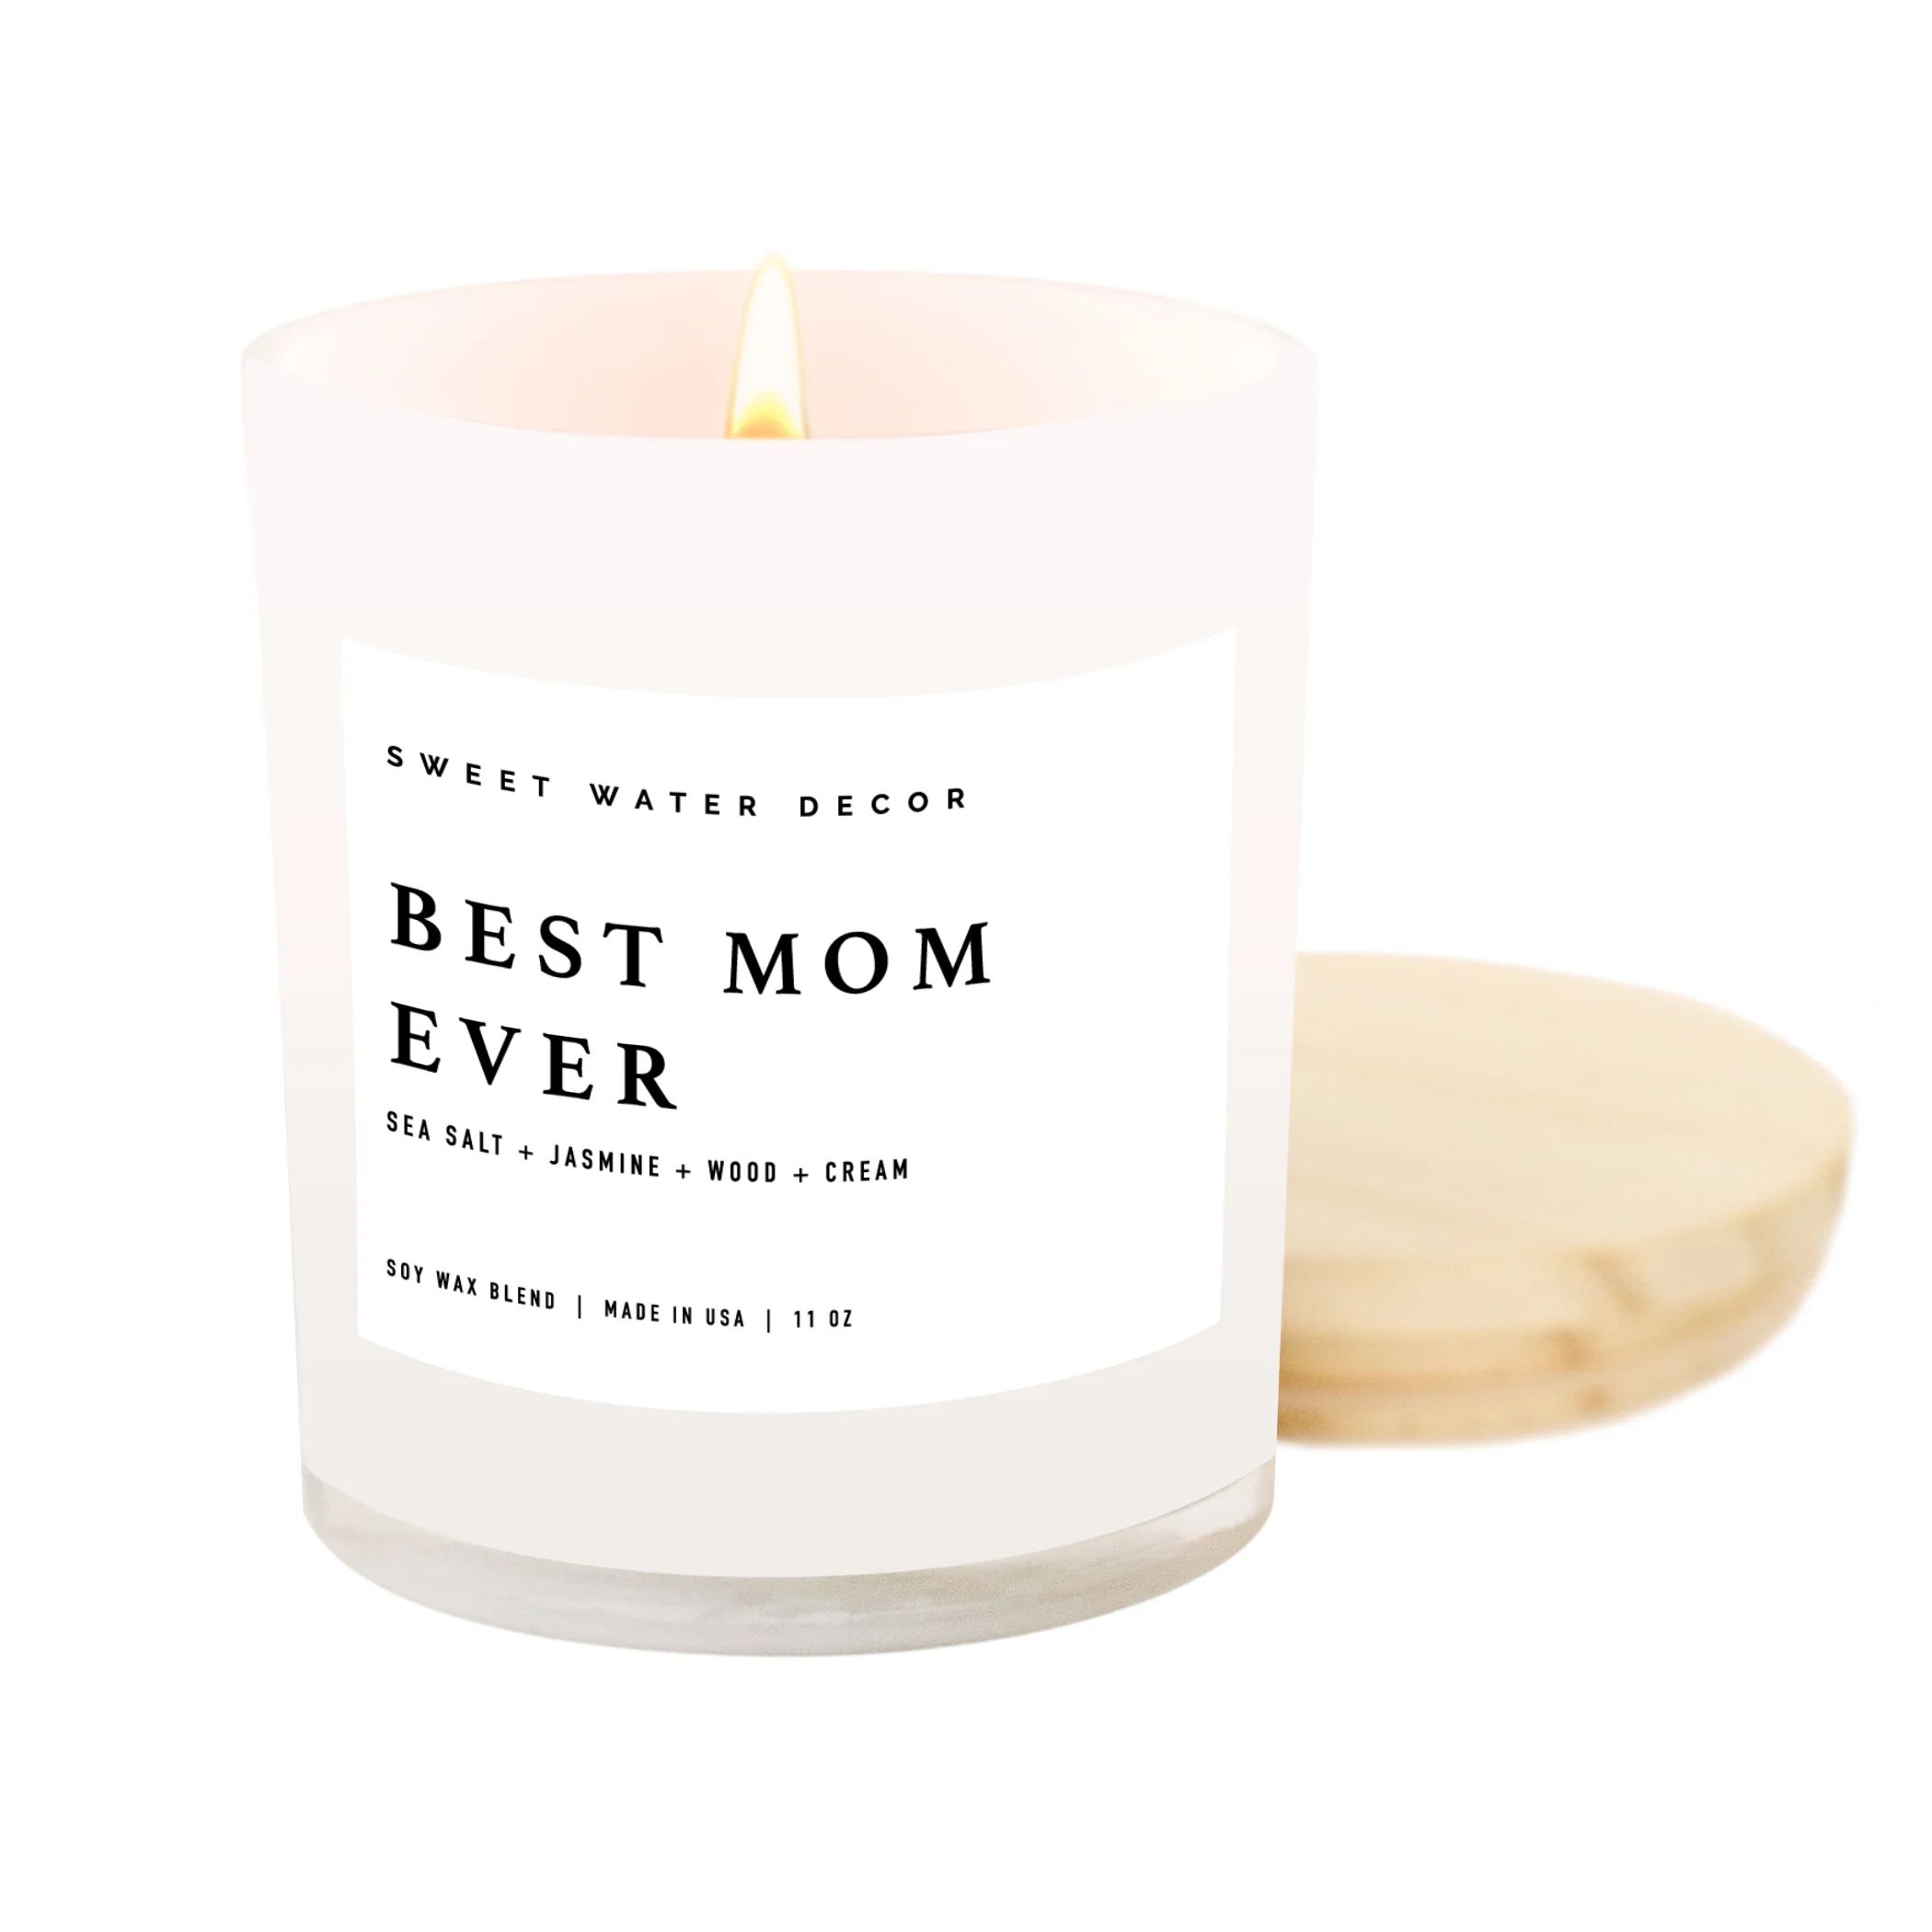 Best Mom Ever! Soy Candle - White Jar - 11 oz | Sweet Water Decor, LLC